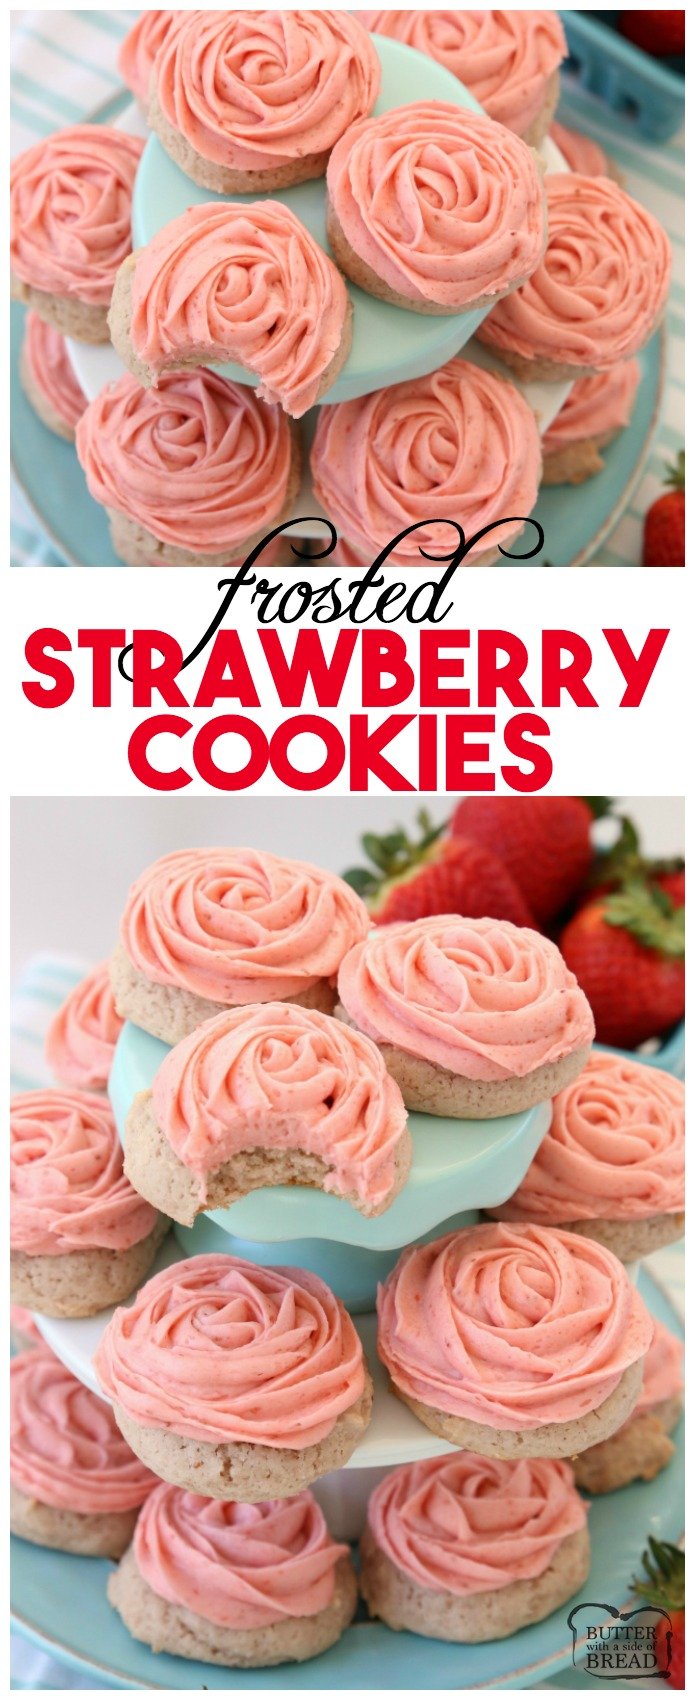 Frosted Strawberry Cookies made by adding fresh strawberries to a simple sugar cookie dough. No rolling out or chilling necessary! Just bake and top with my amazing strawberry buttercream frosting. Easy Strawberry Cookies piped with a super simple pink rose, so they taste incredible and they’re pretty too! Best Ever #Strawberry #Cookies with Strawberry #Buttercream #Frosting #recipe from Butter With A Side of Bread #baking #food #dessert